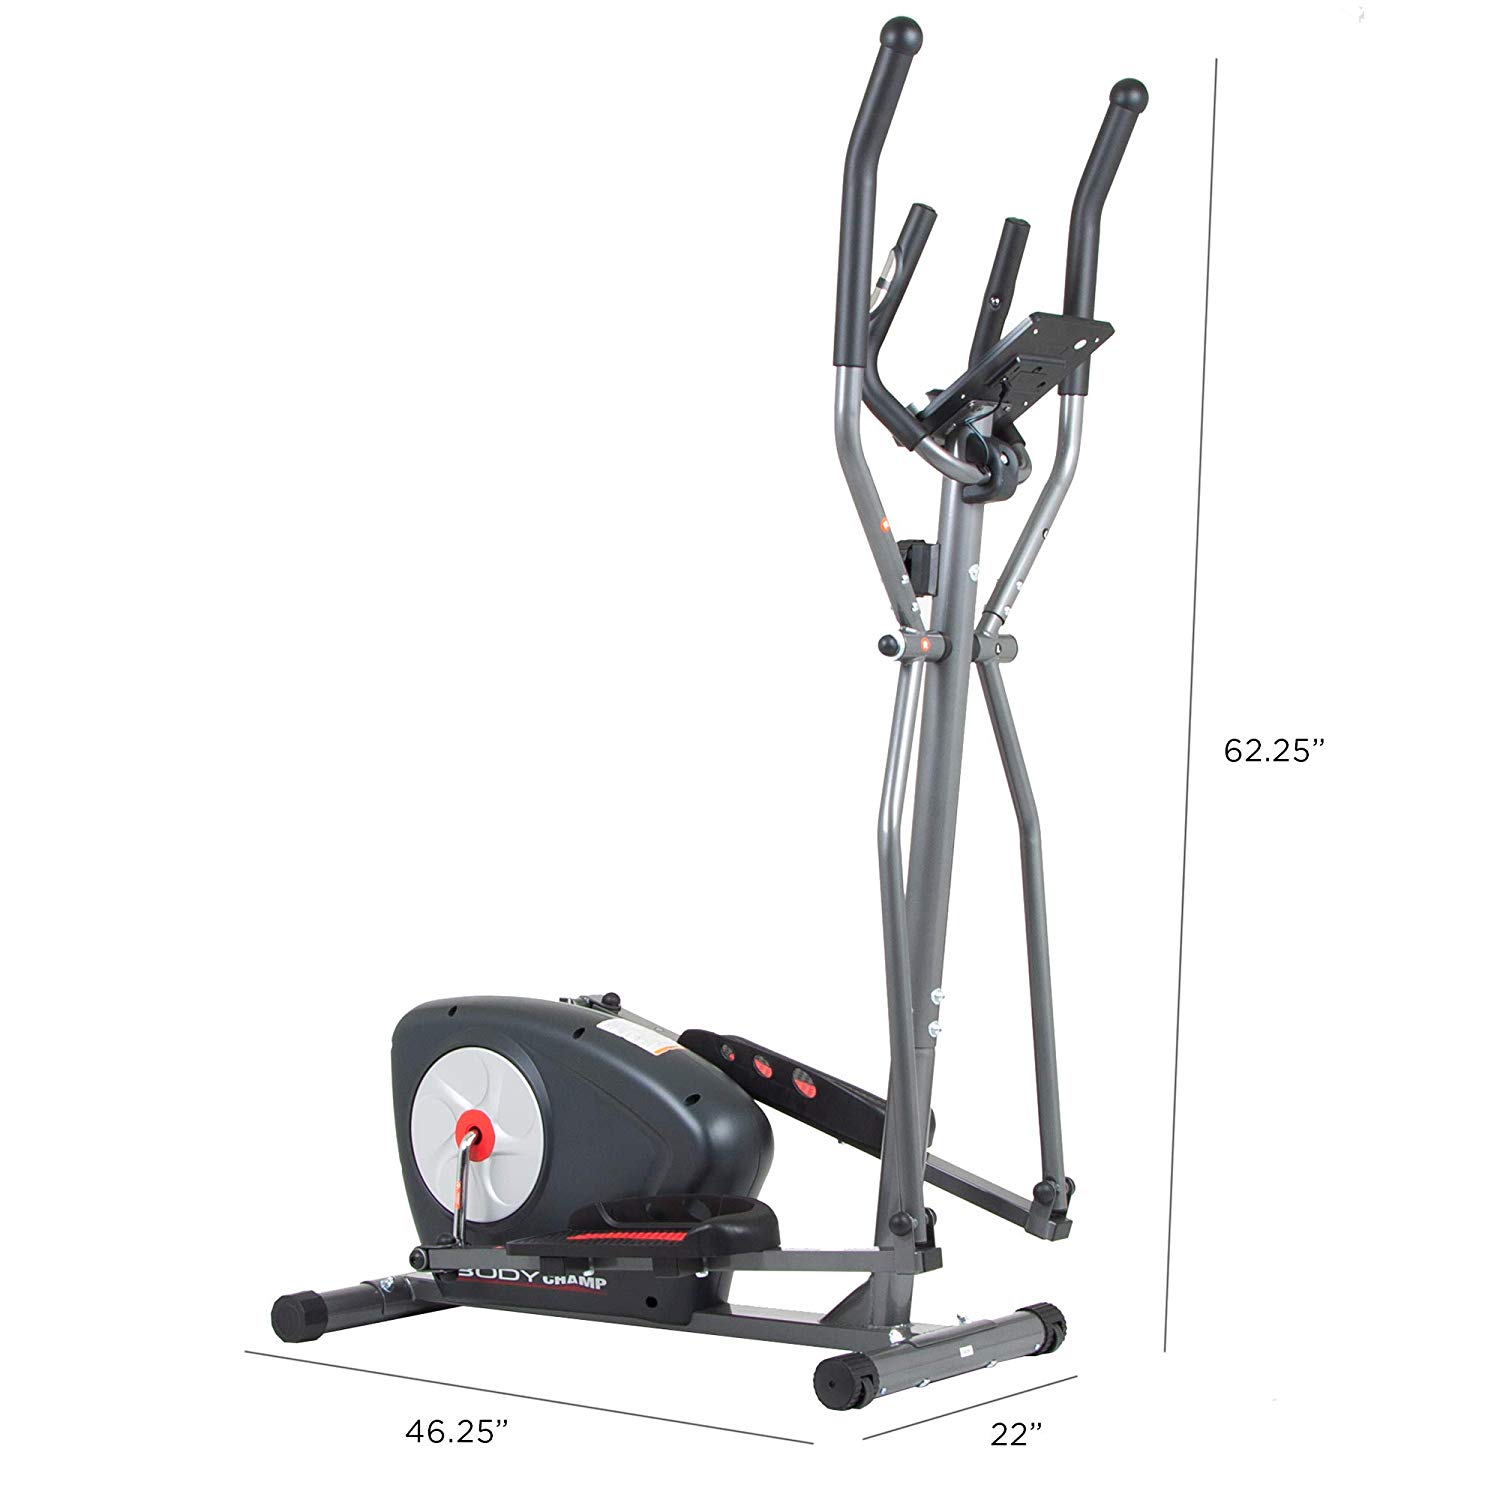 Body Champ Magnetic Adjustable Elliptical Machine Trainer with LCD Monitor - image 3 of 7